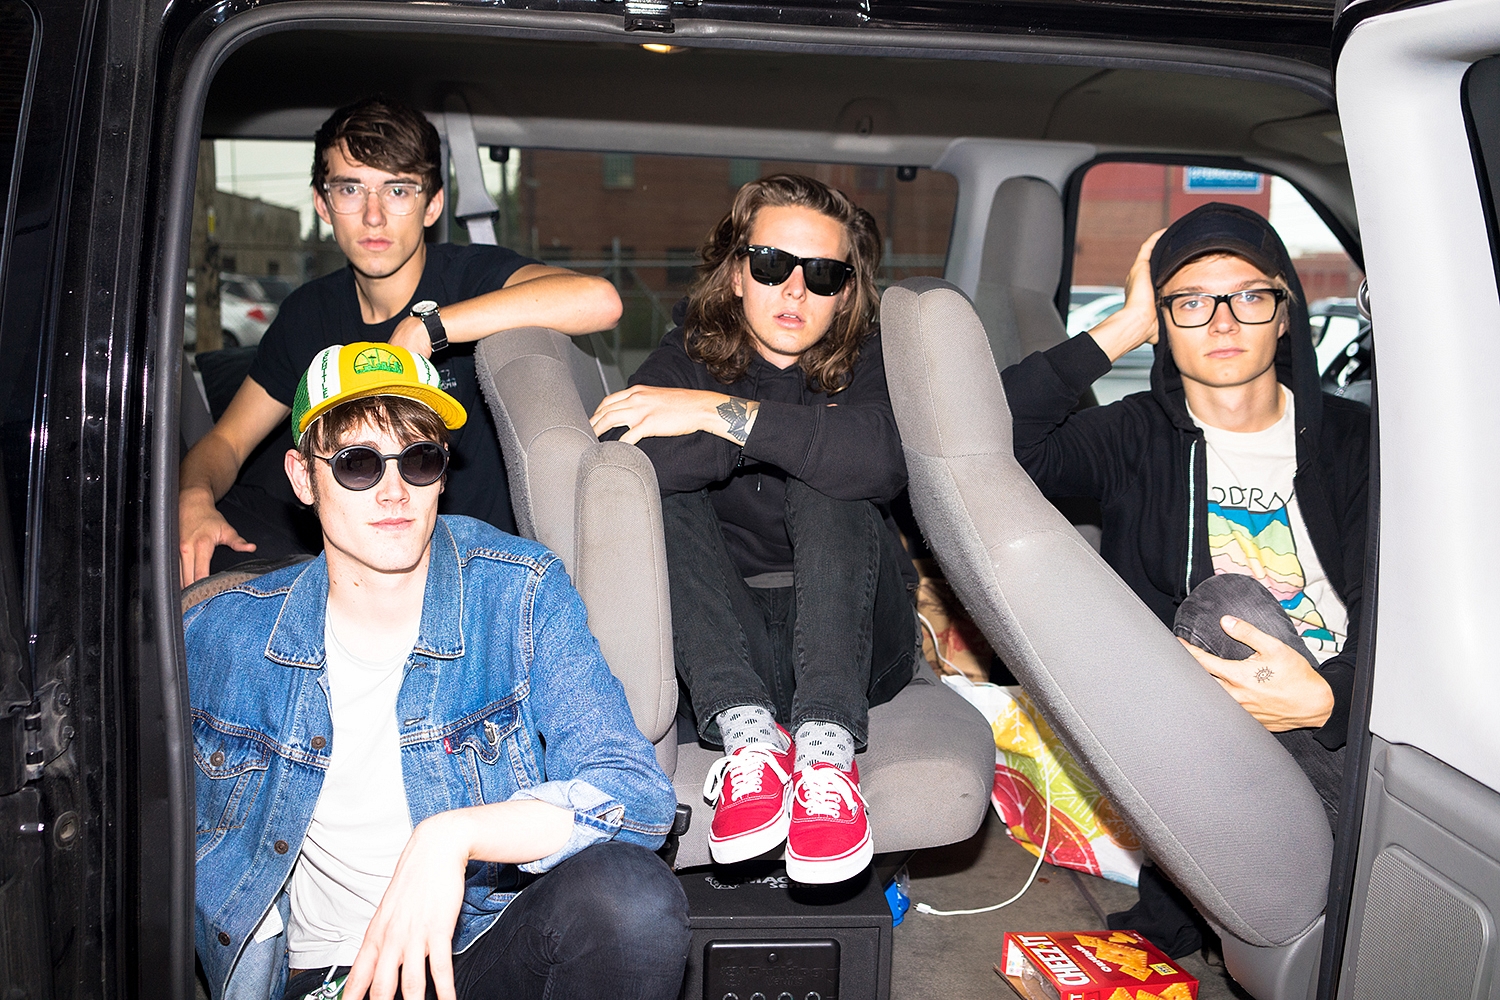 Hippo Campus announce new album ‘Bambi’ with title track and talk festival plans